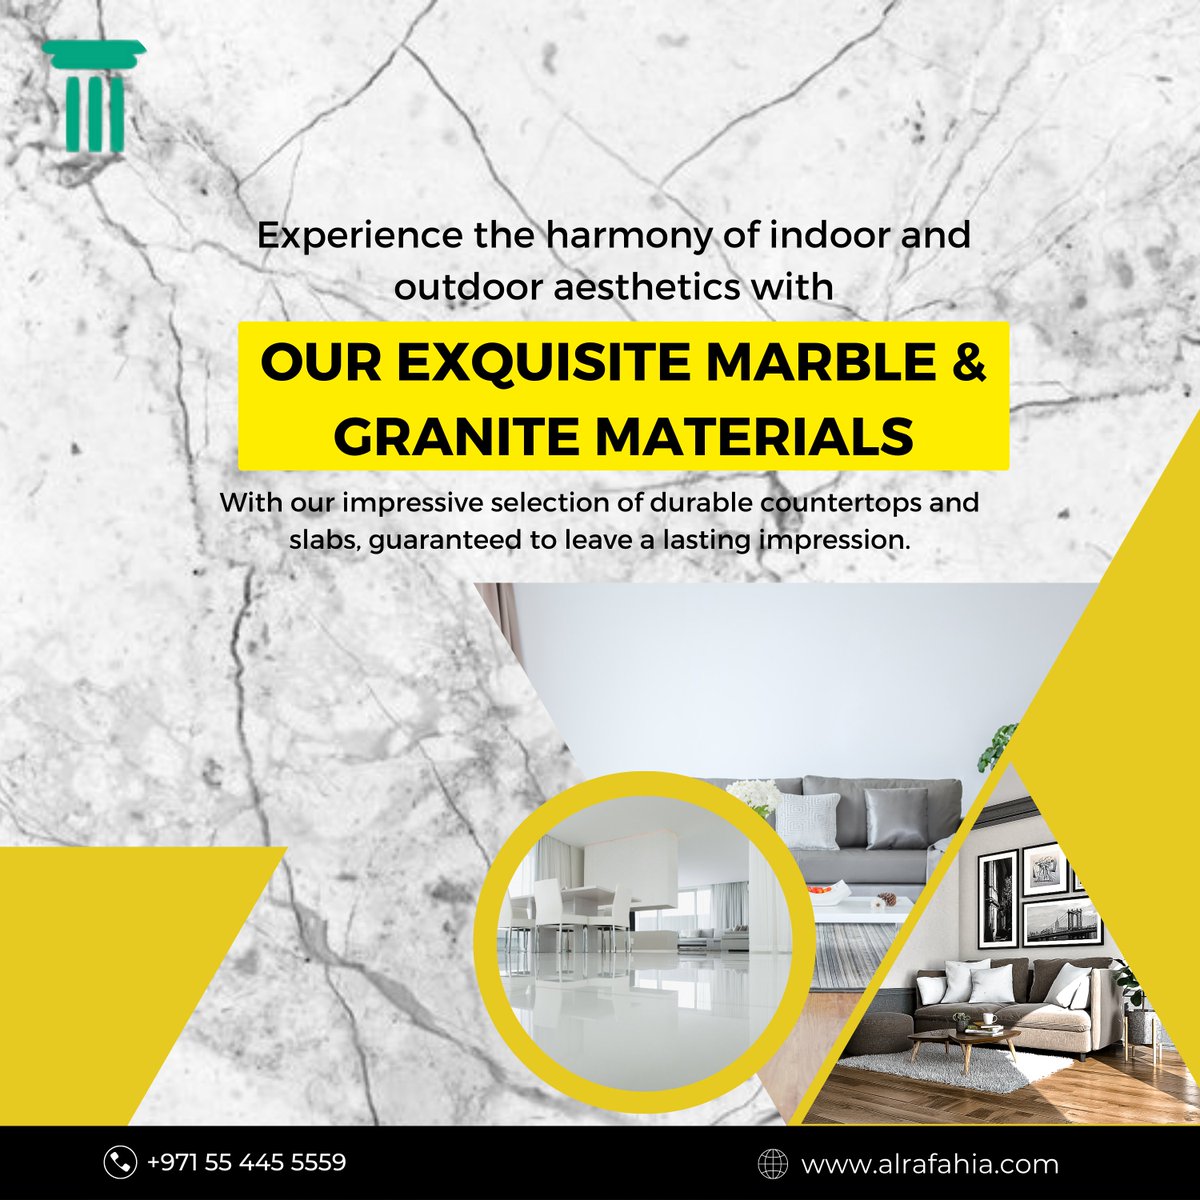 Experience the epitome of luxury with our exquisite marble & granite materials from al Rafahia Marble Granite & Quartz. Elevate your space with timeless beauty and unmatched craftsmanship.

Visit our website Now!
.
#AlRafahia #Countertops #LuxuryLiving #GraniteElegance